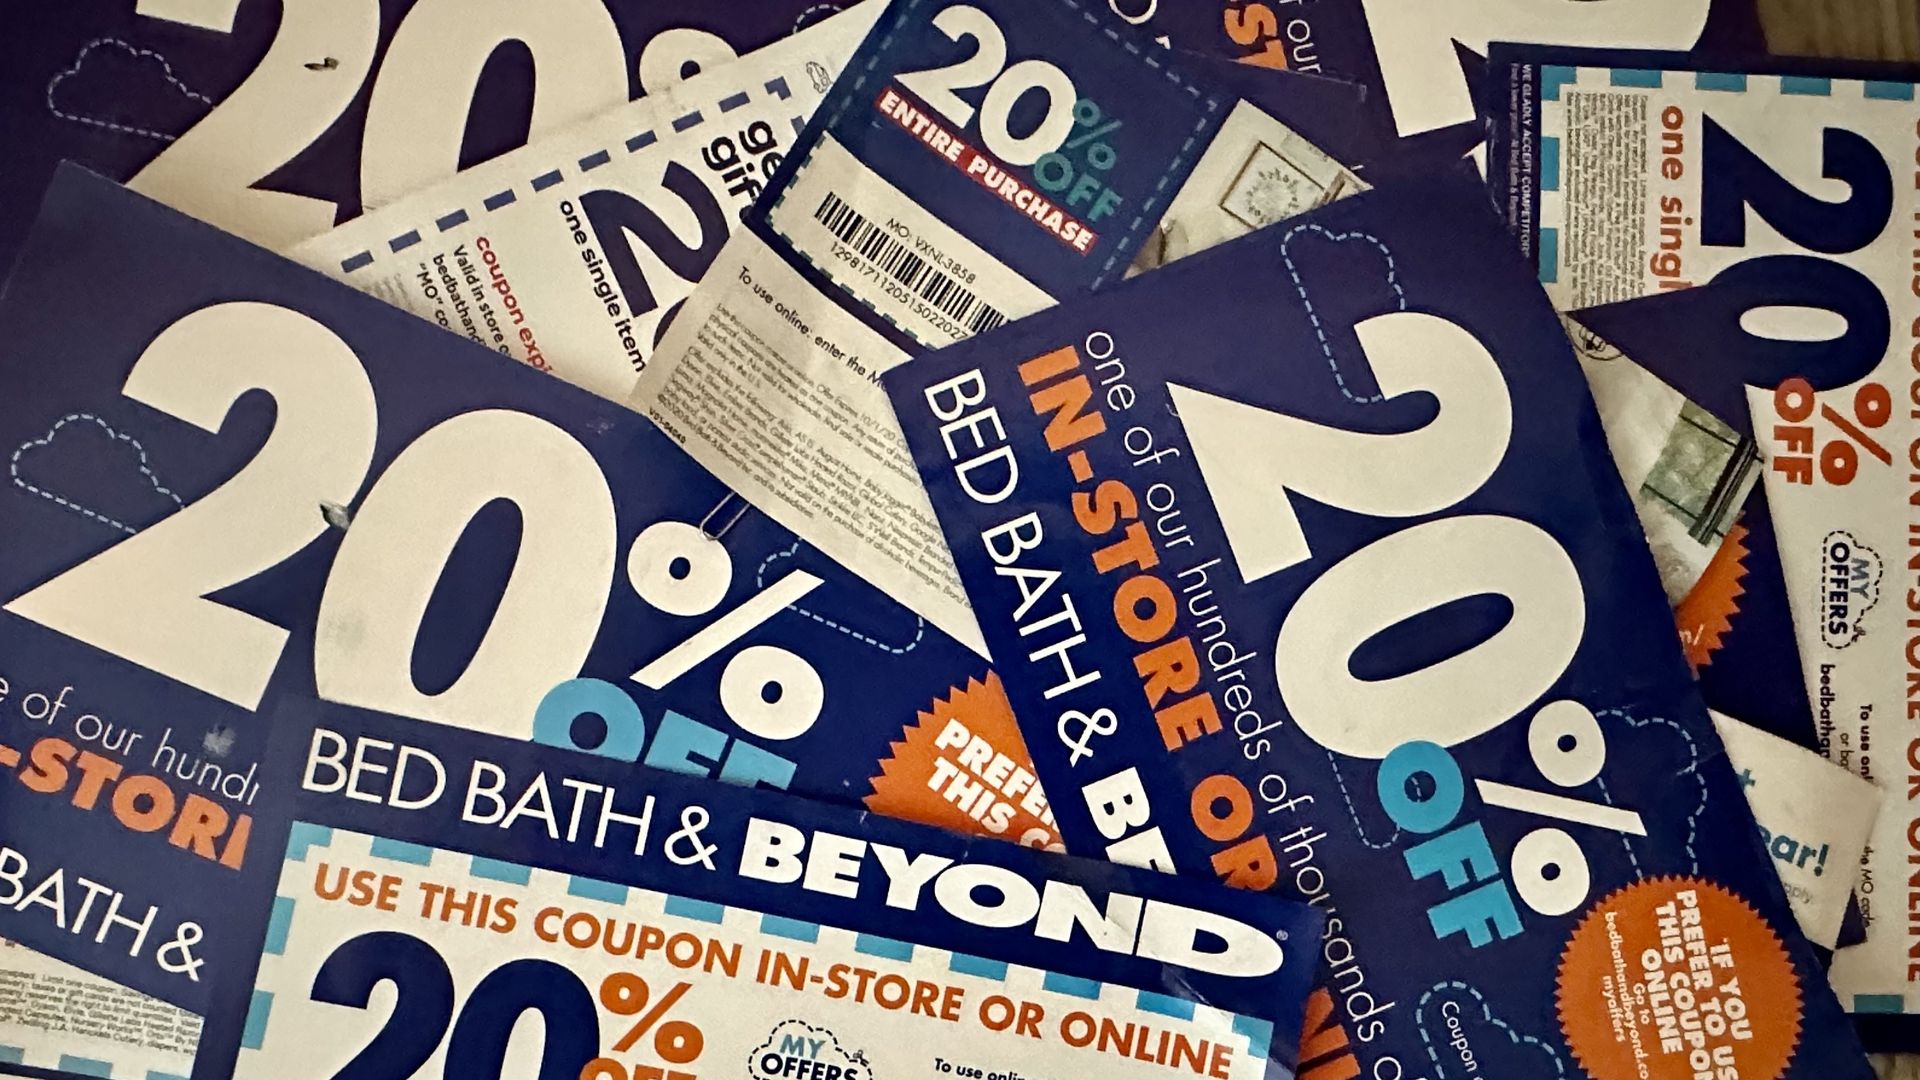 Big Lots, Container Store step in to accept expired Bed Bath & Beyond